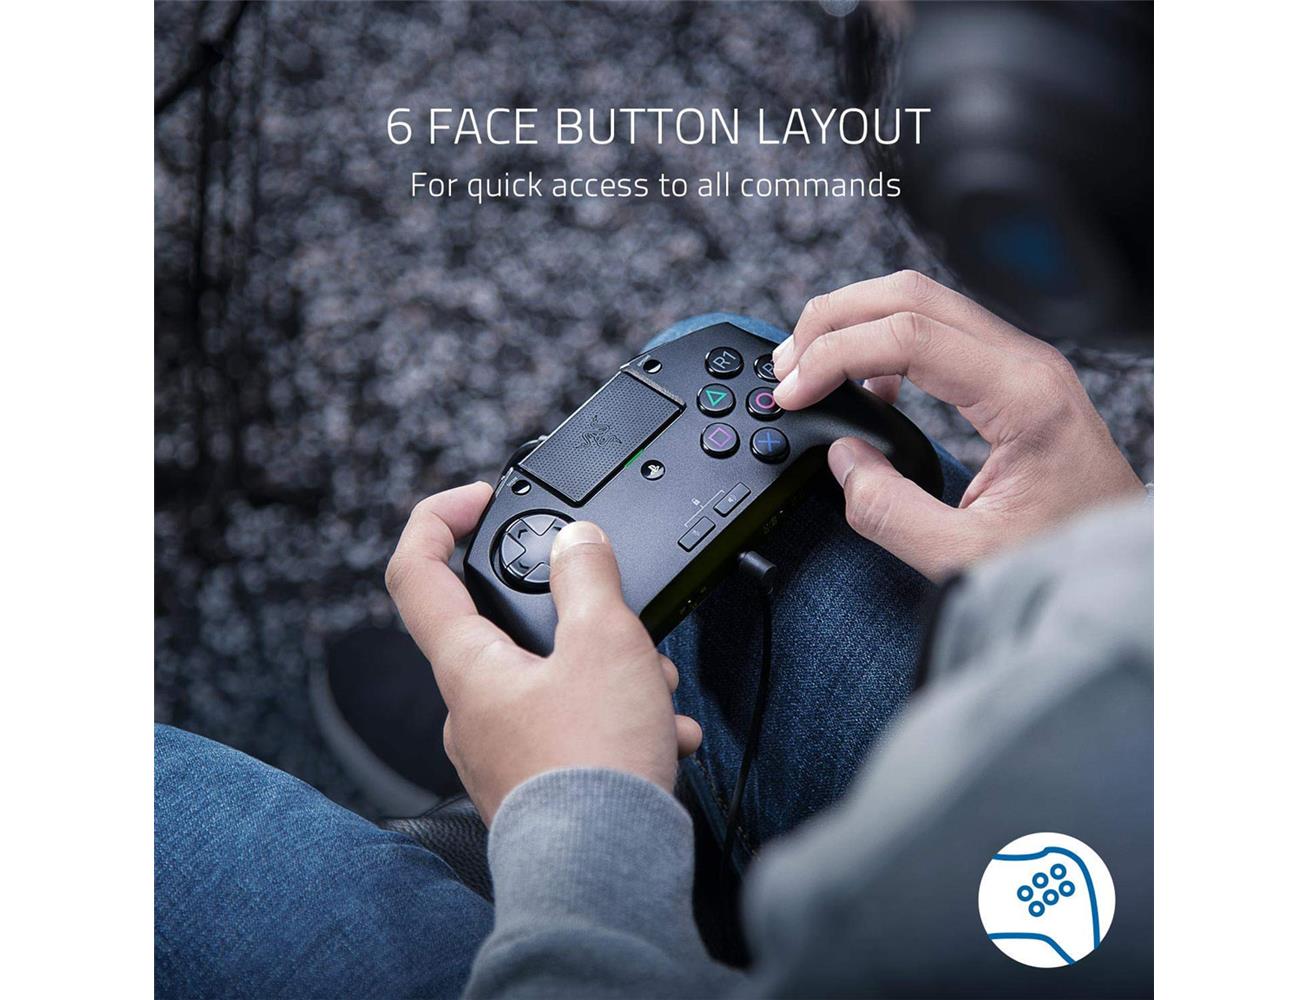 Razer RAION Fightpad Game Controller for PS4